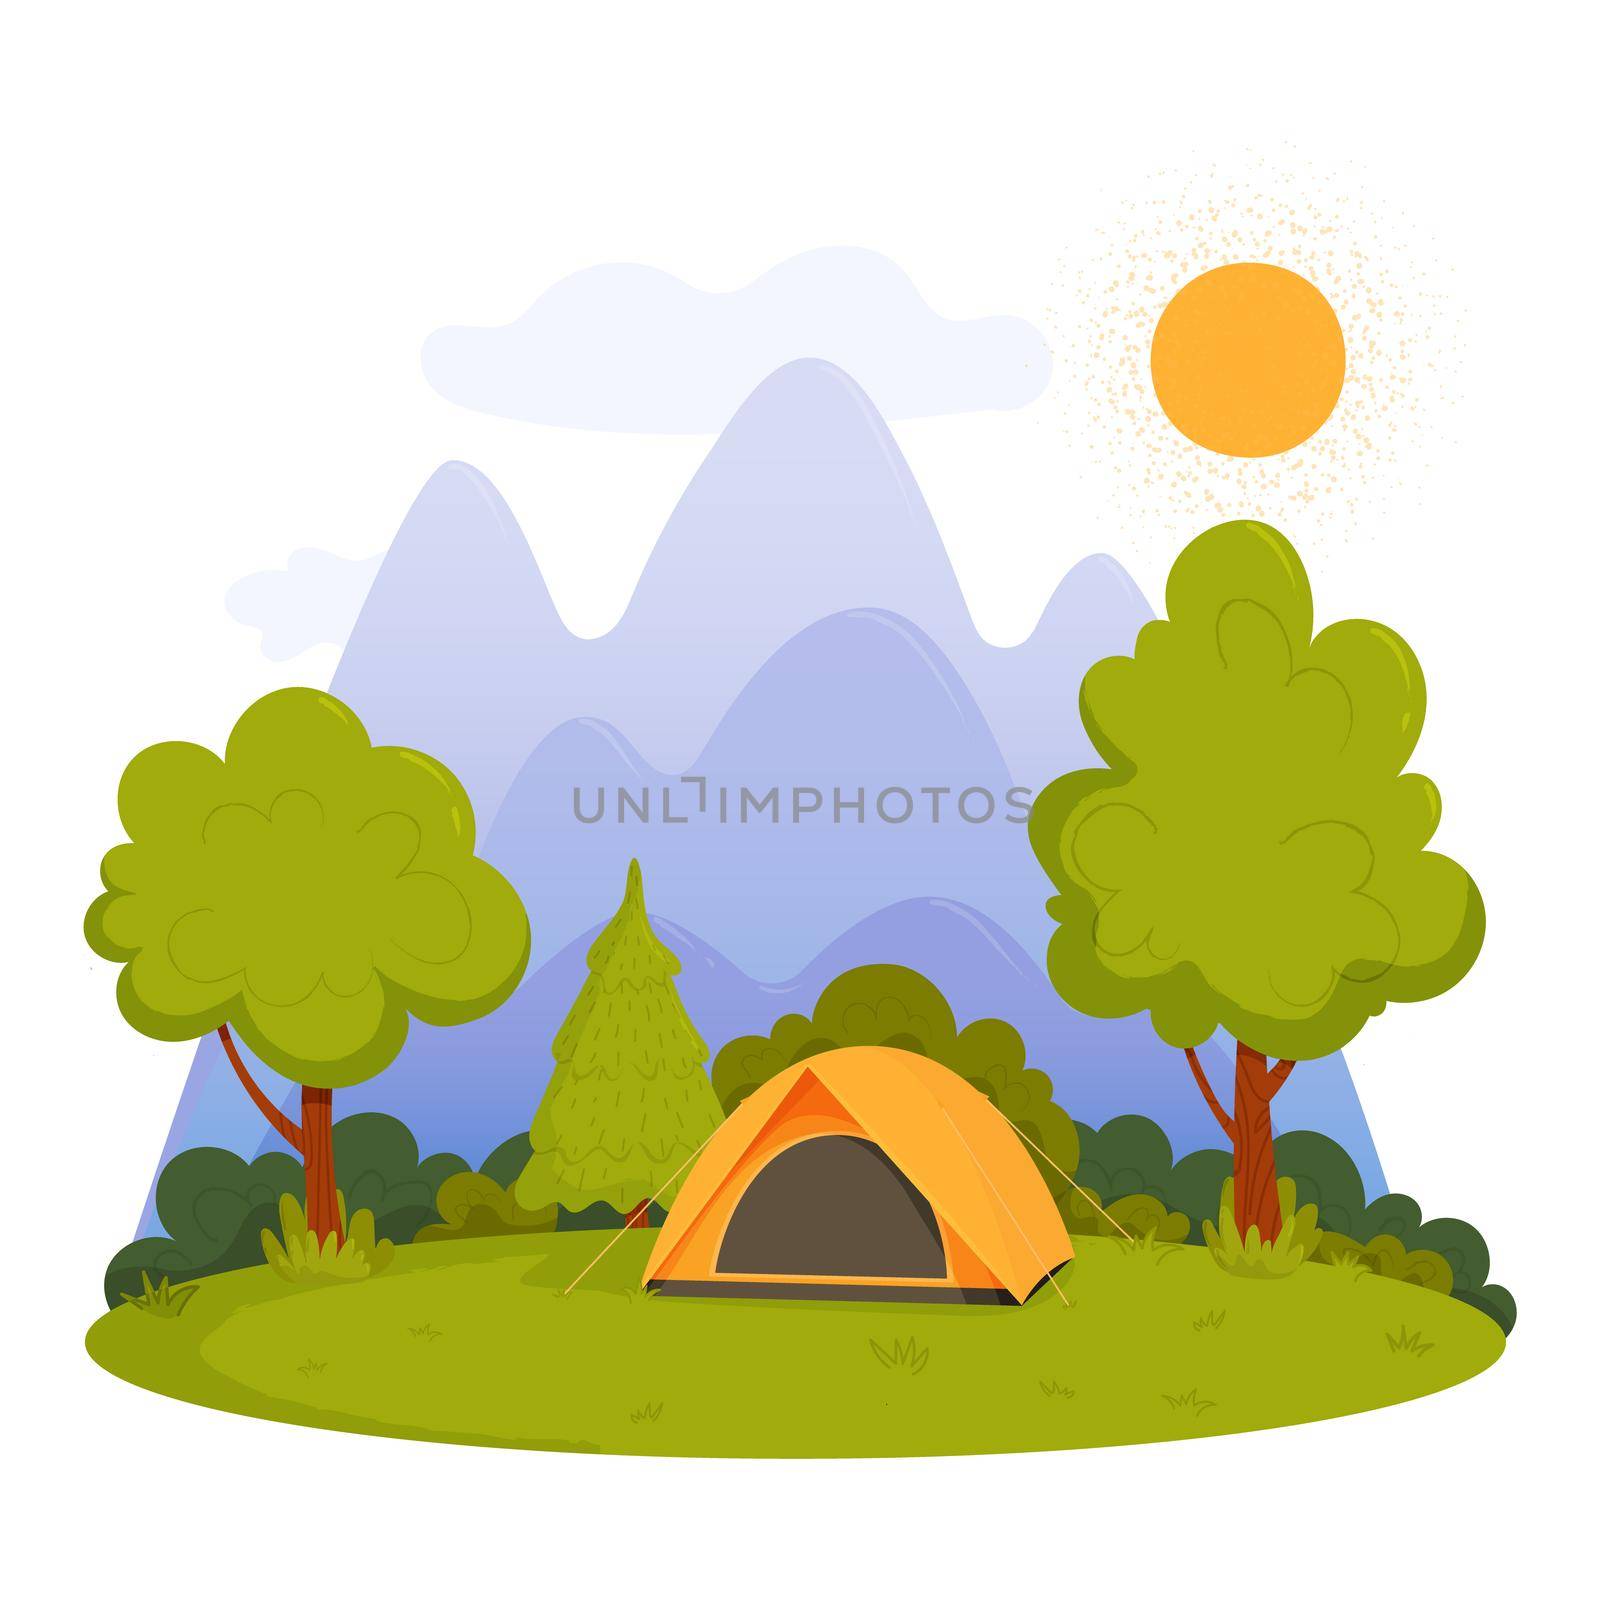 Summer camping. Sunny day landscape with a tent, mountains, forest and sun. Vector illustration in cartoon style for summer camp, nature tourism, camping